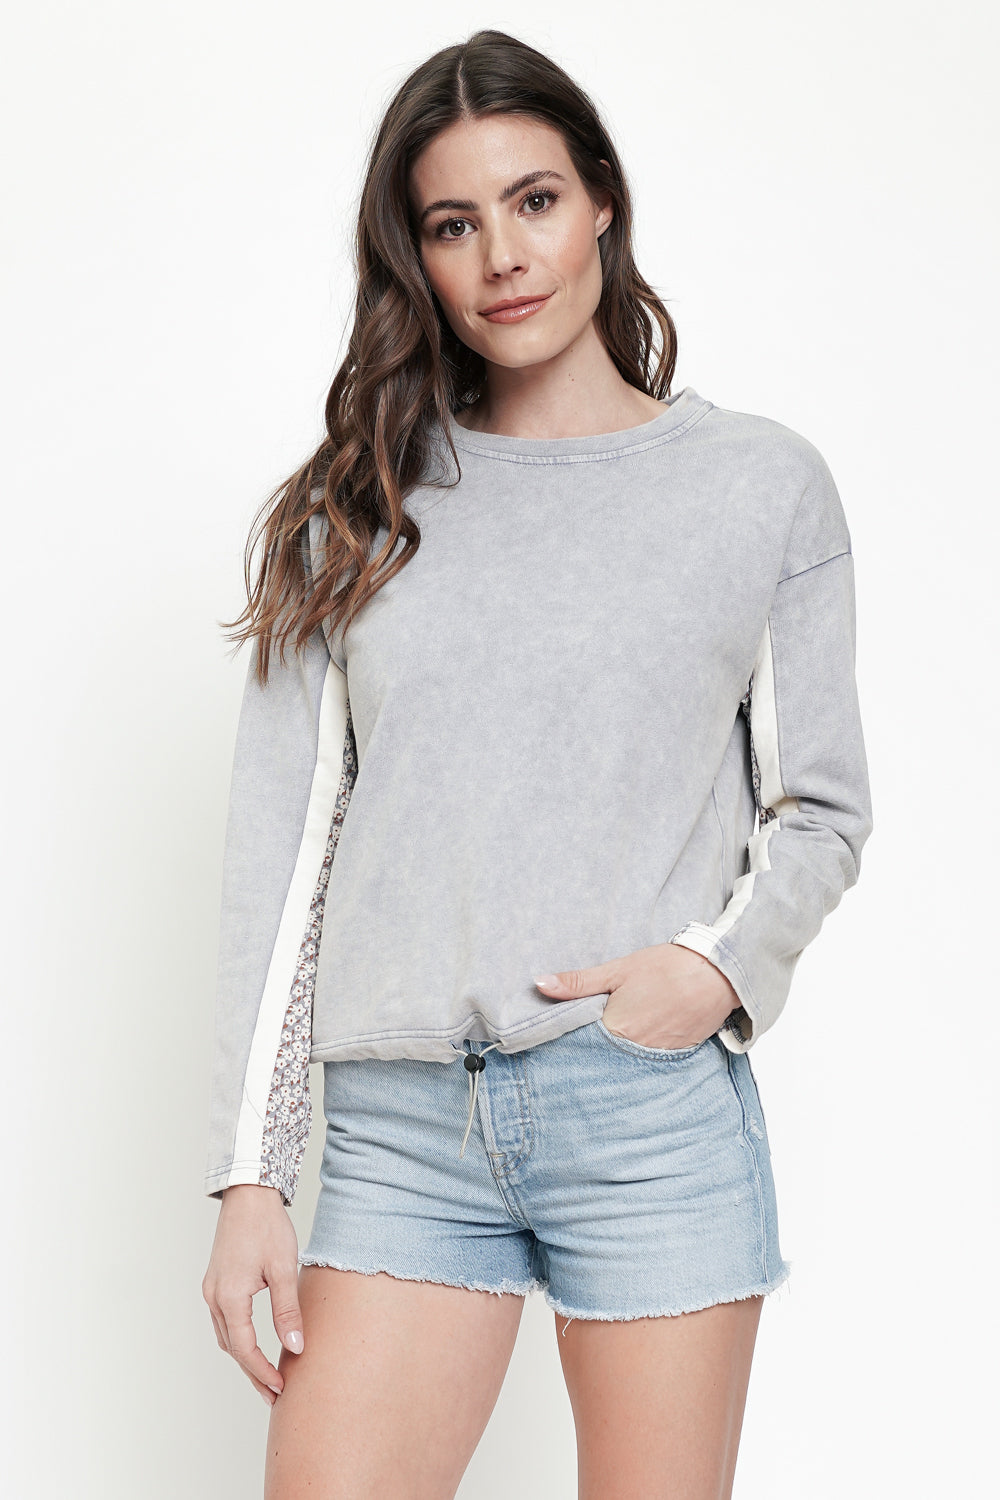 Grey with Patterned Sleeves